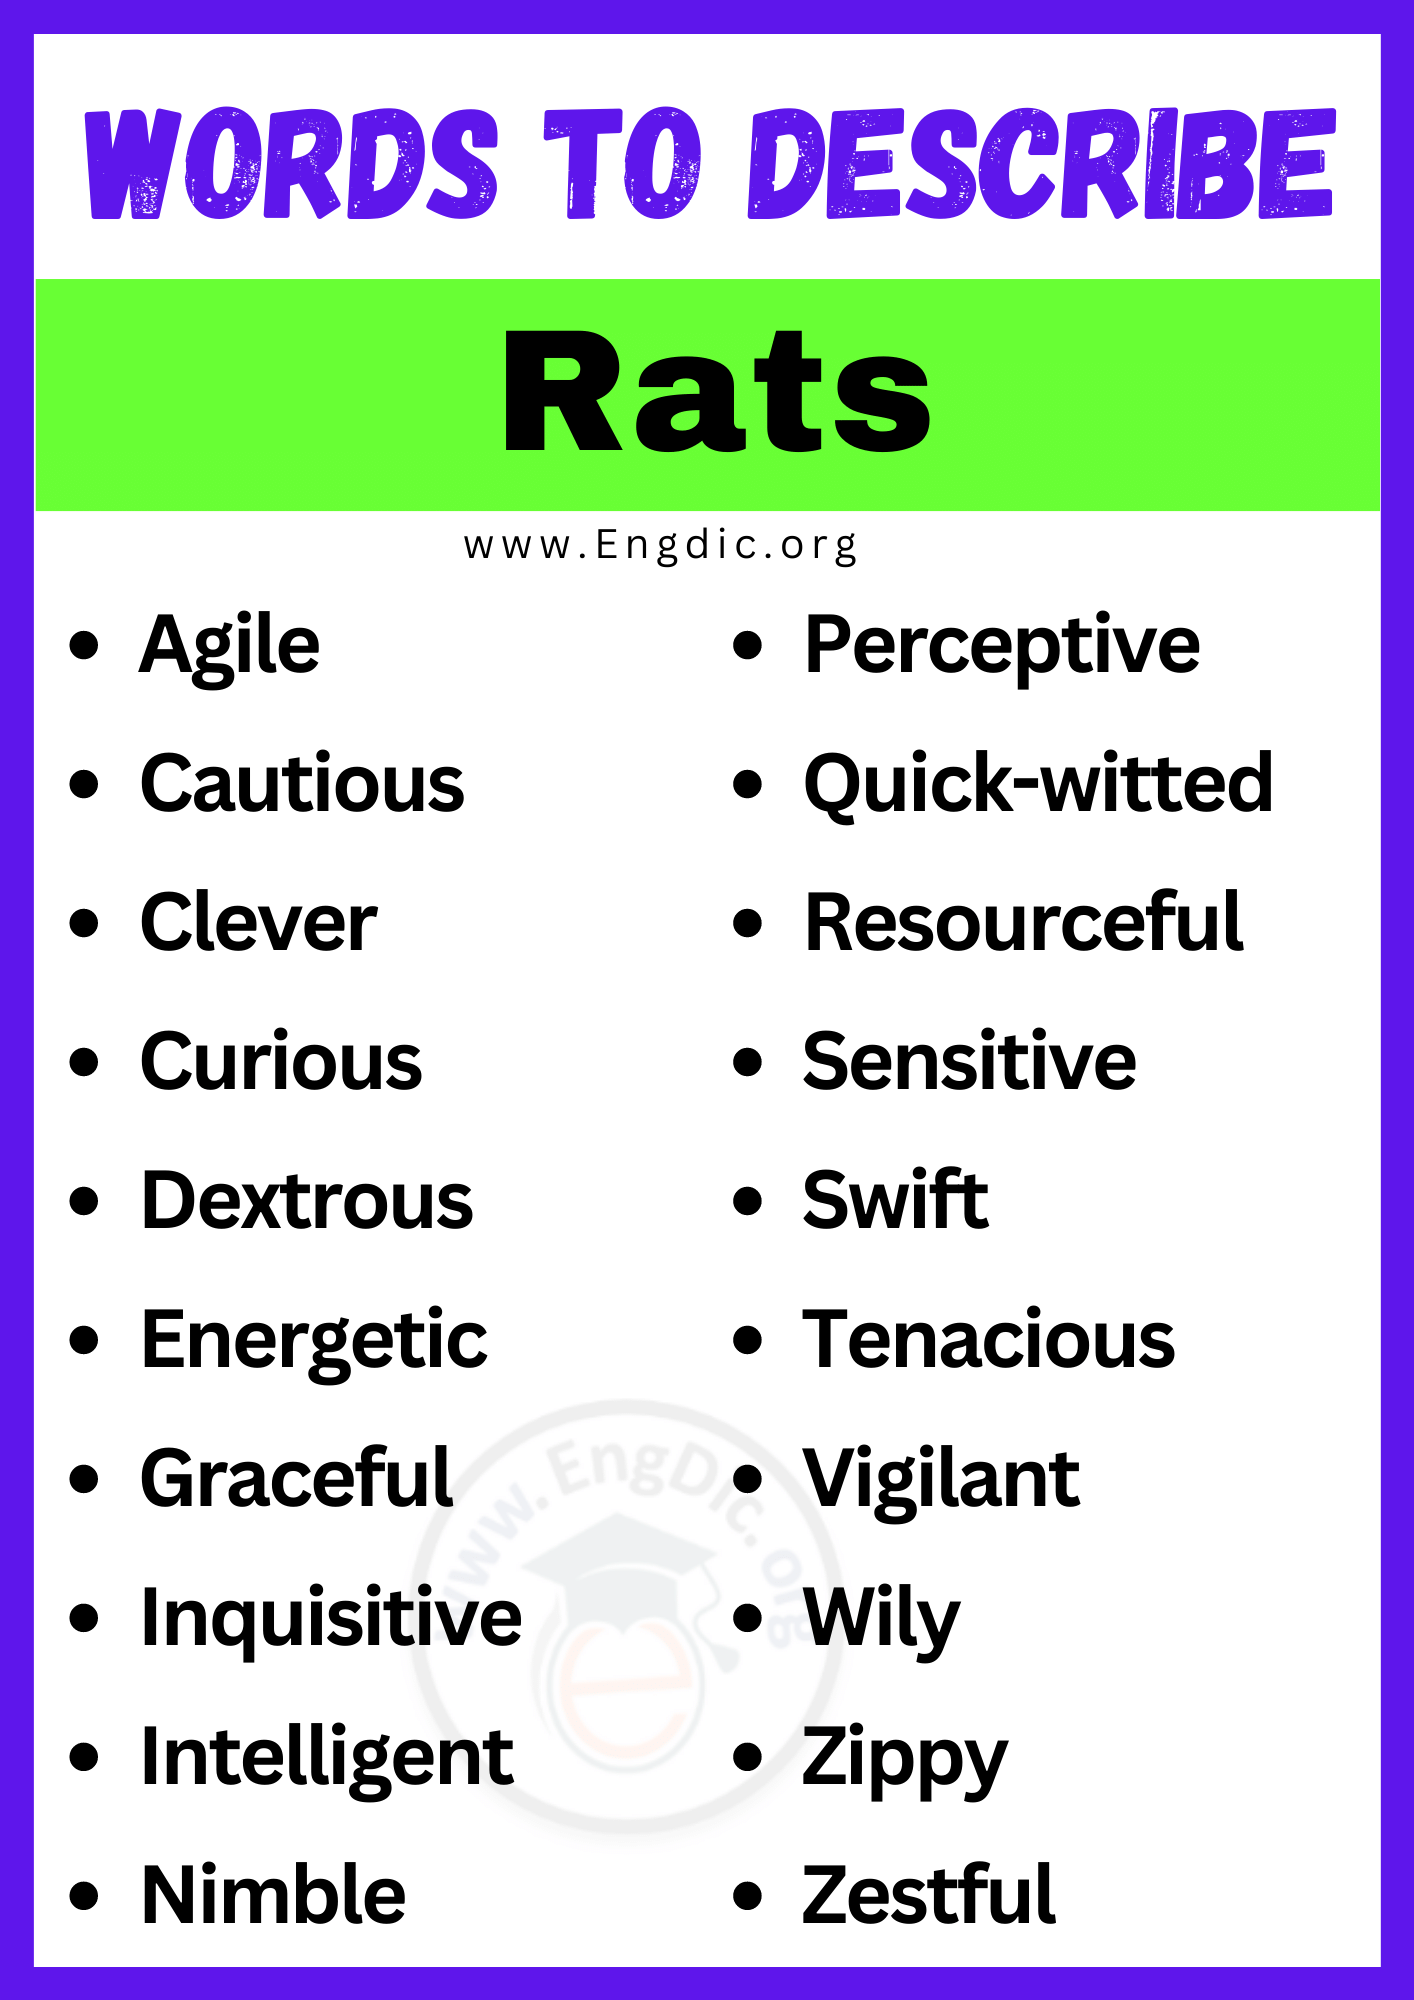 Words to Describe Rats